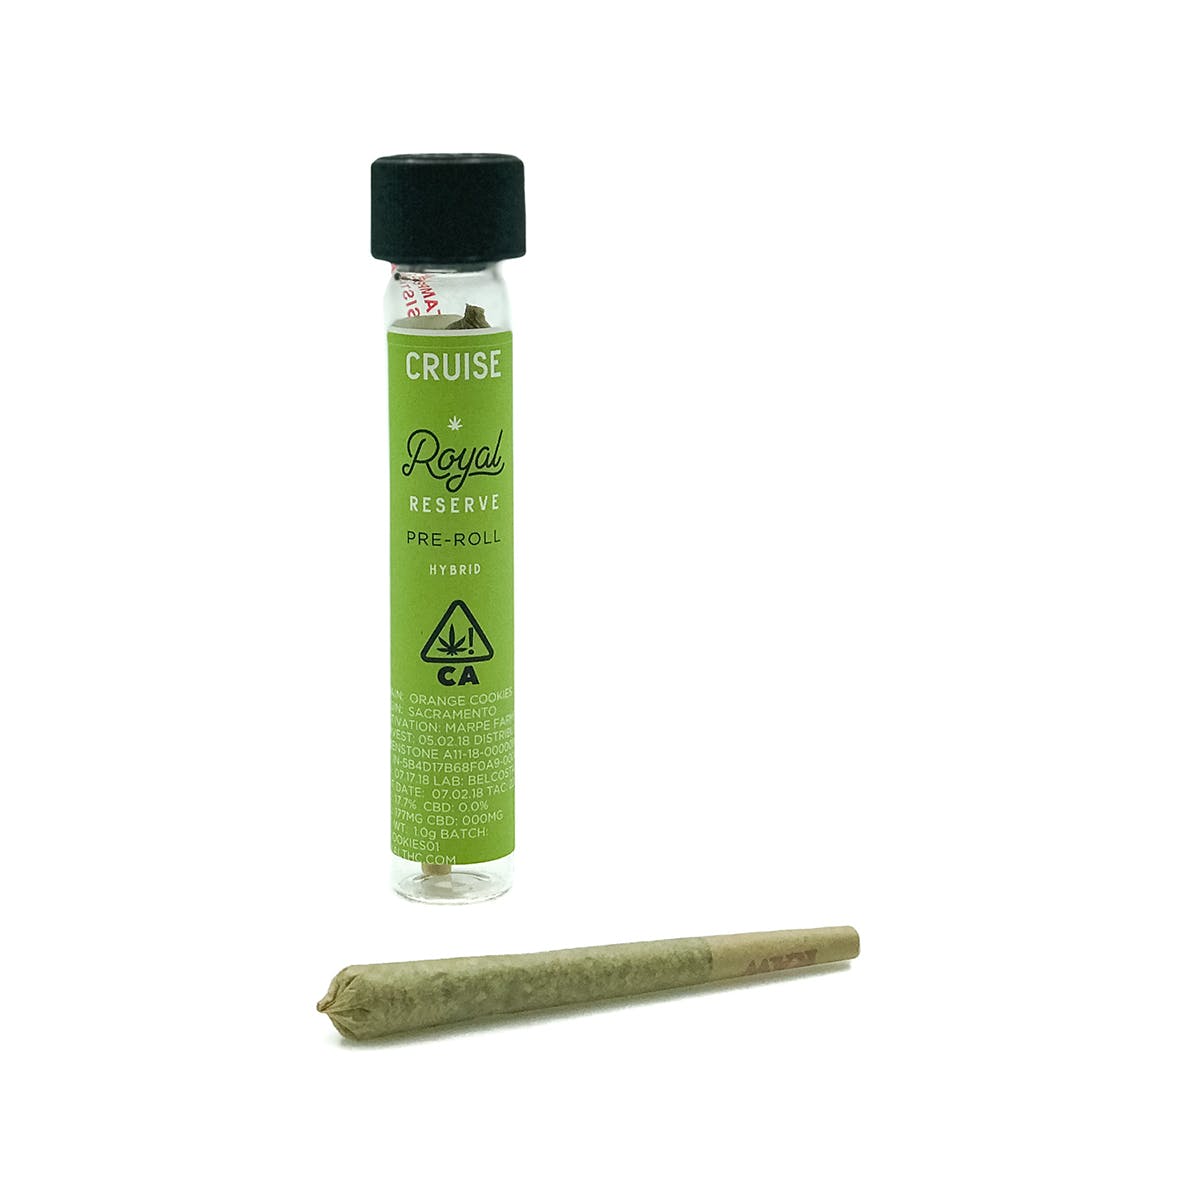 Royal Reserve CRUISE Pre Roll